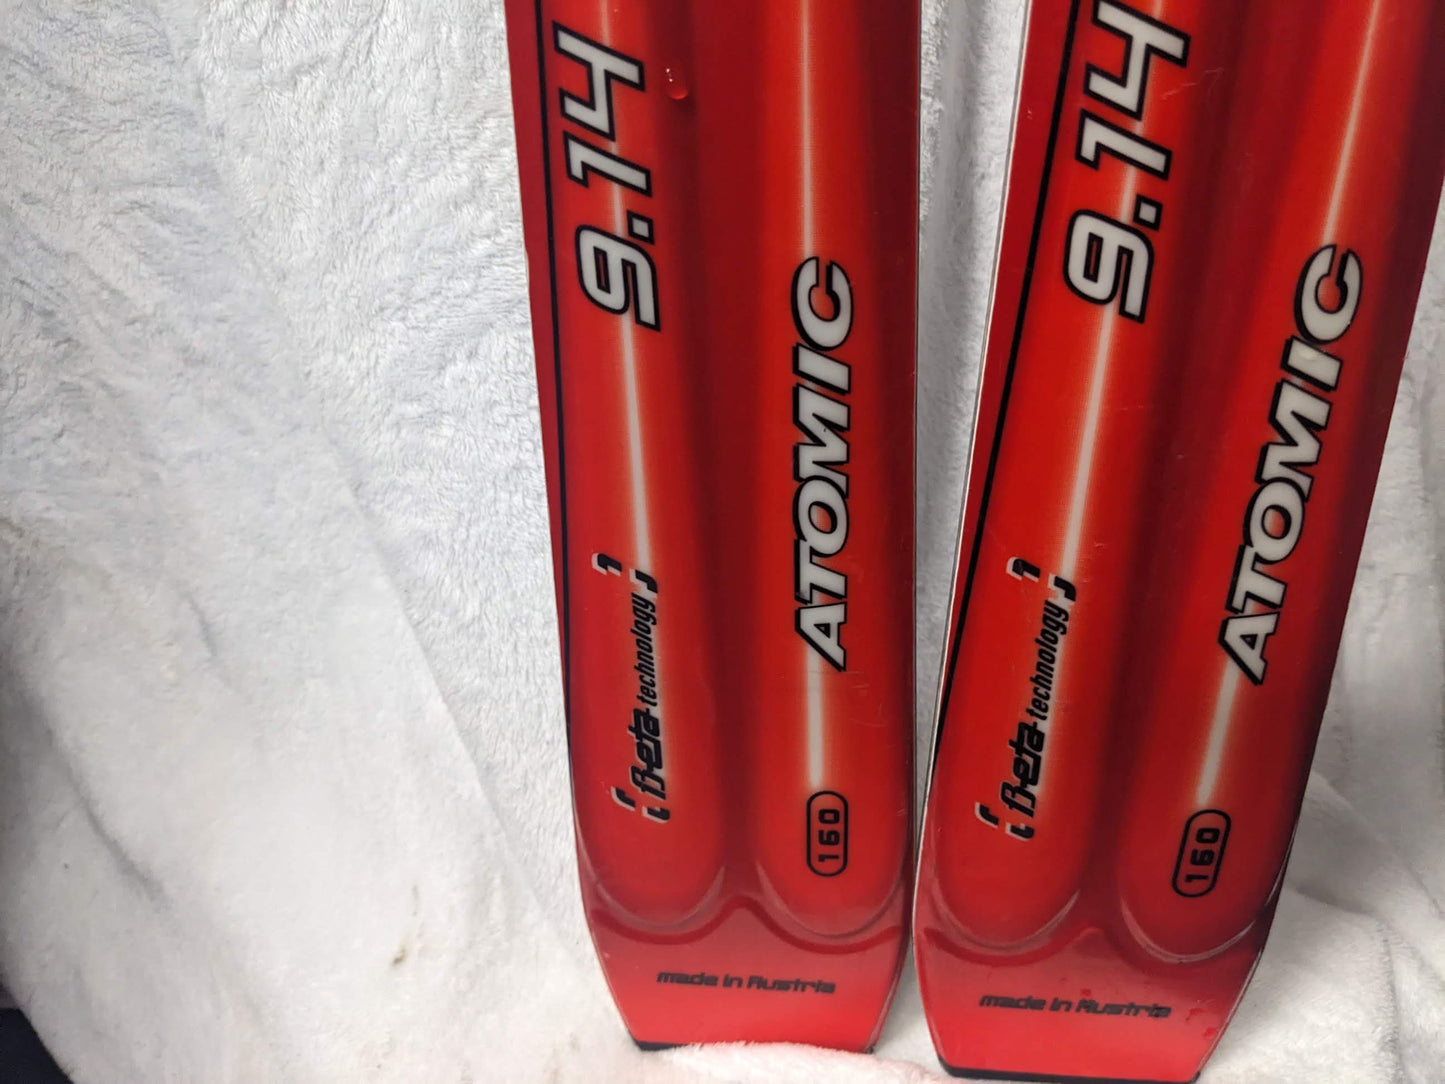 Atomic Beta CarvX 9.14 Skis *No Bindings* Size 160 Cm Color Red Condition Used